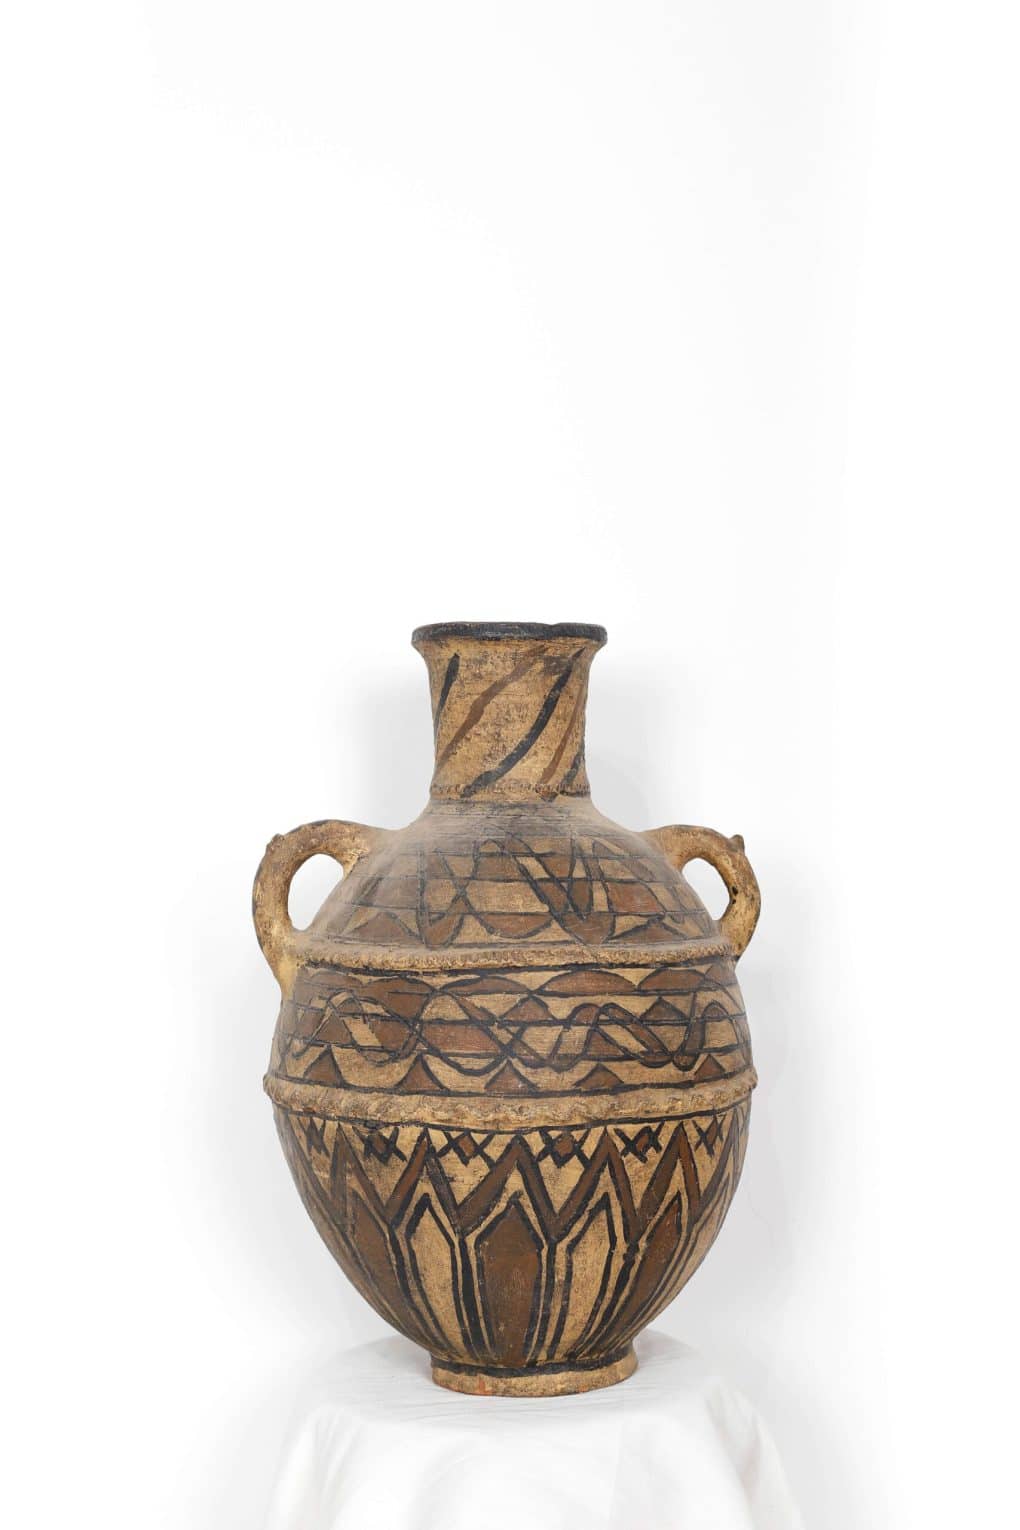 Explore Ancient Moroccan Pottery: Timeless Craftsmanship and Cultural Heritage